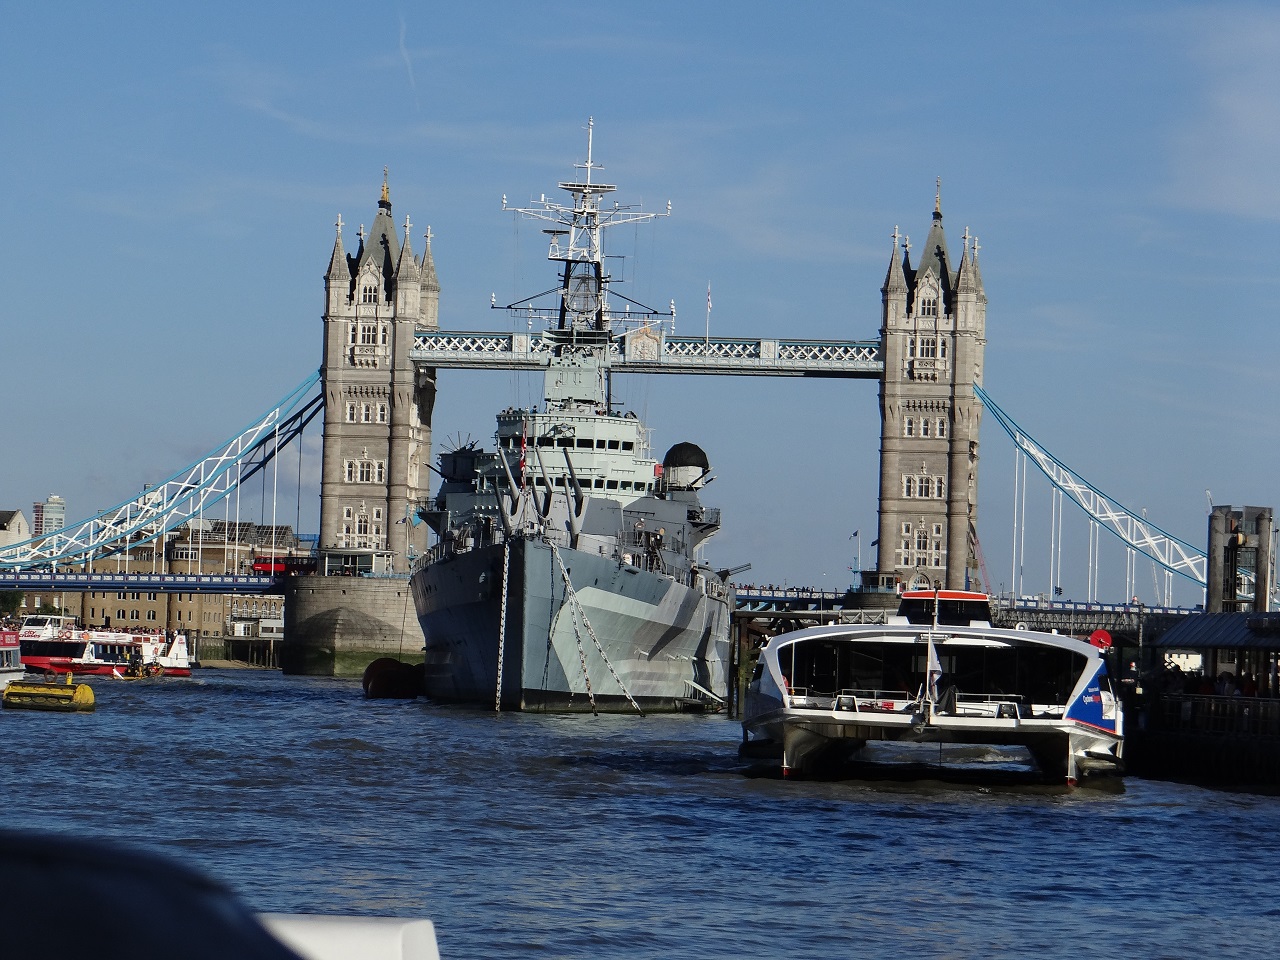 London Tower Bride and HMS Belfast on Thames